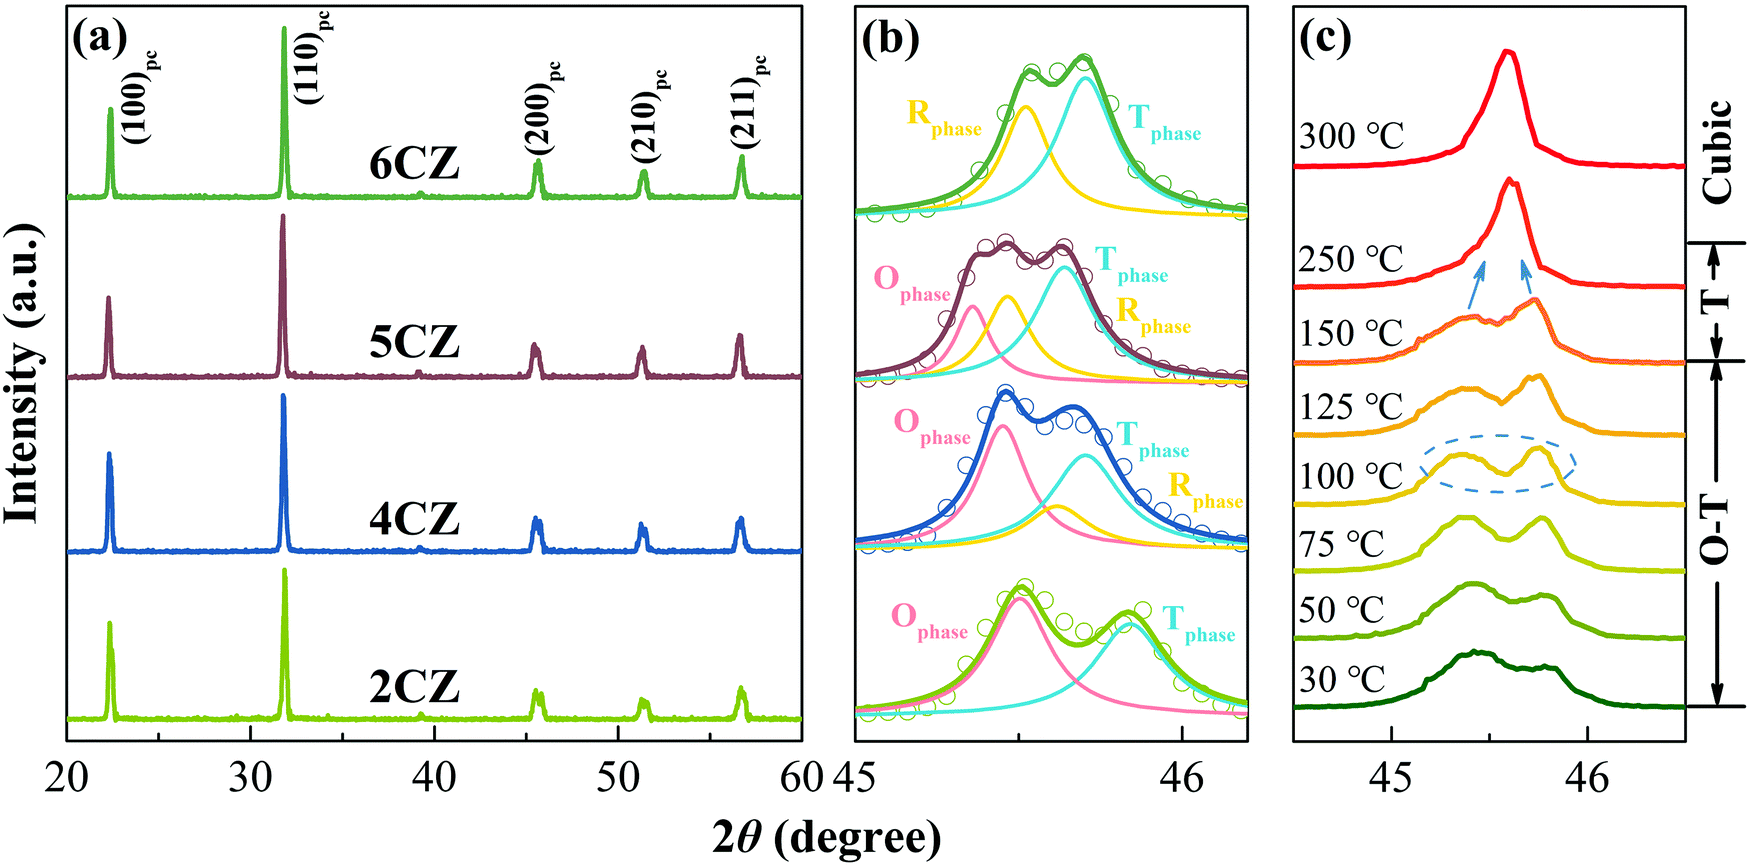 Synergistically Optimizing Electrocaloric Effects And Temperature Span In Knn Based Ceramics Utilizing A Relaxor Multiphase Boundary Journal Of Materials Chemistry C Rsc Publishing Doi 10 1039 C9tce